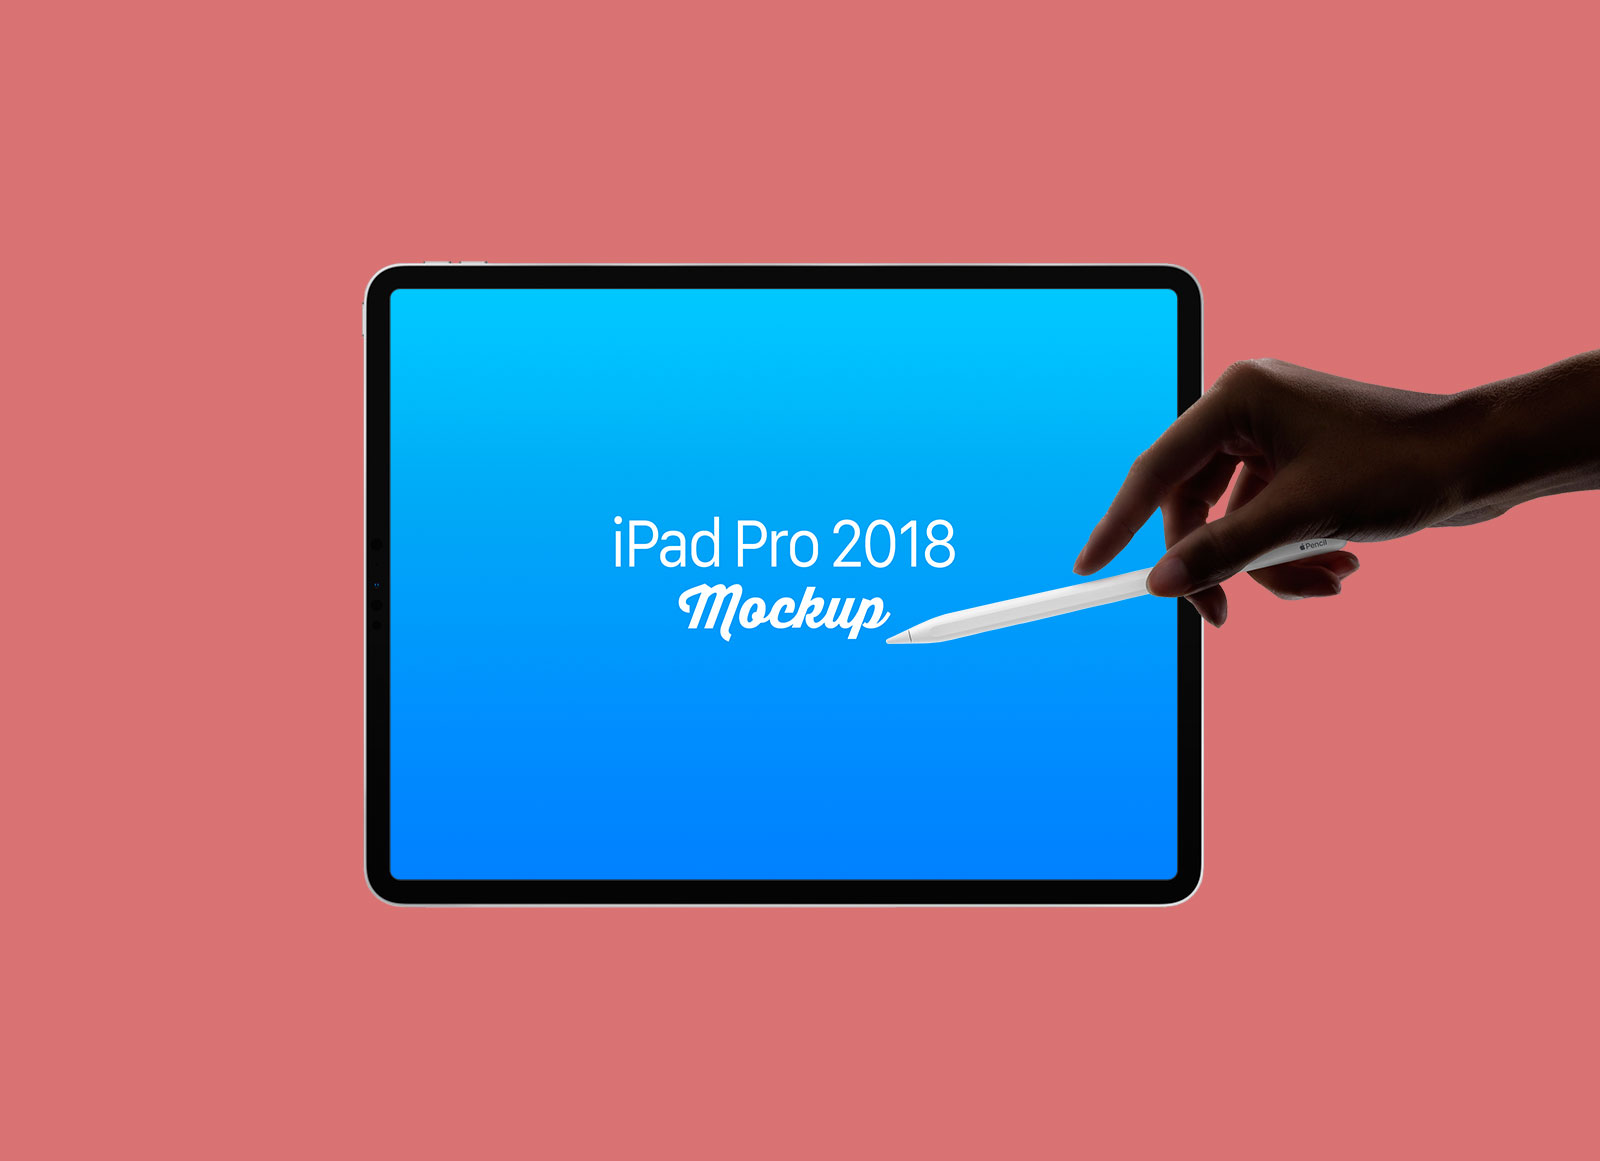 Free-iPad-Pro-2018-Mockup-with-Apple-Pencil-in-Hand-PSD-Set